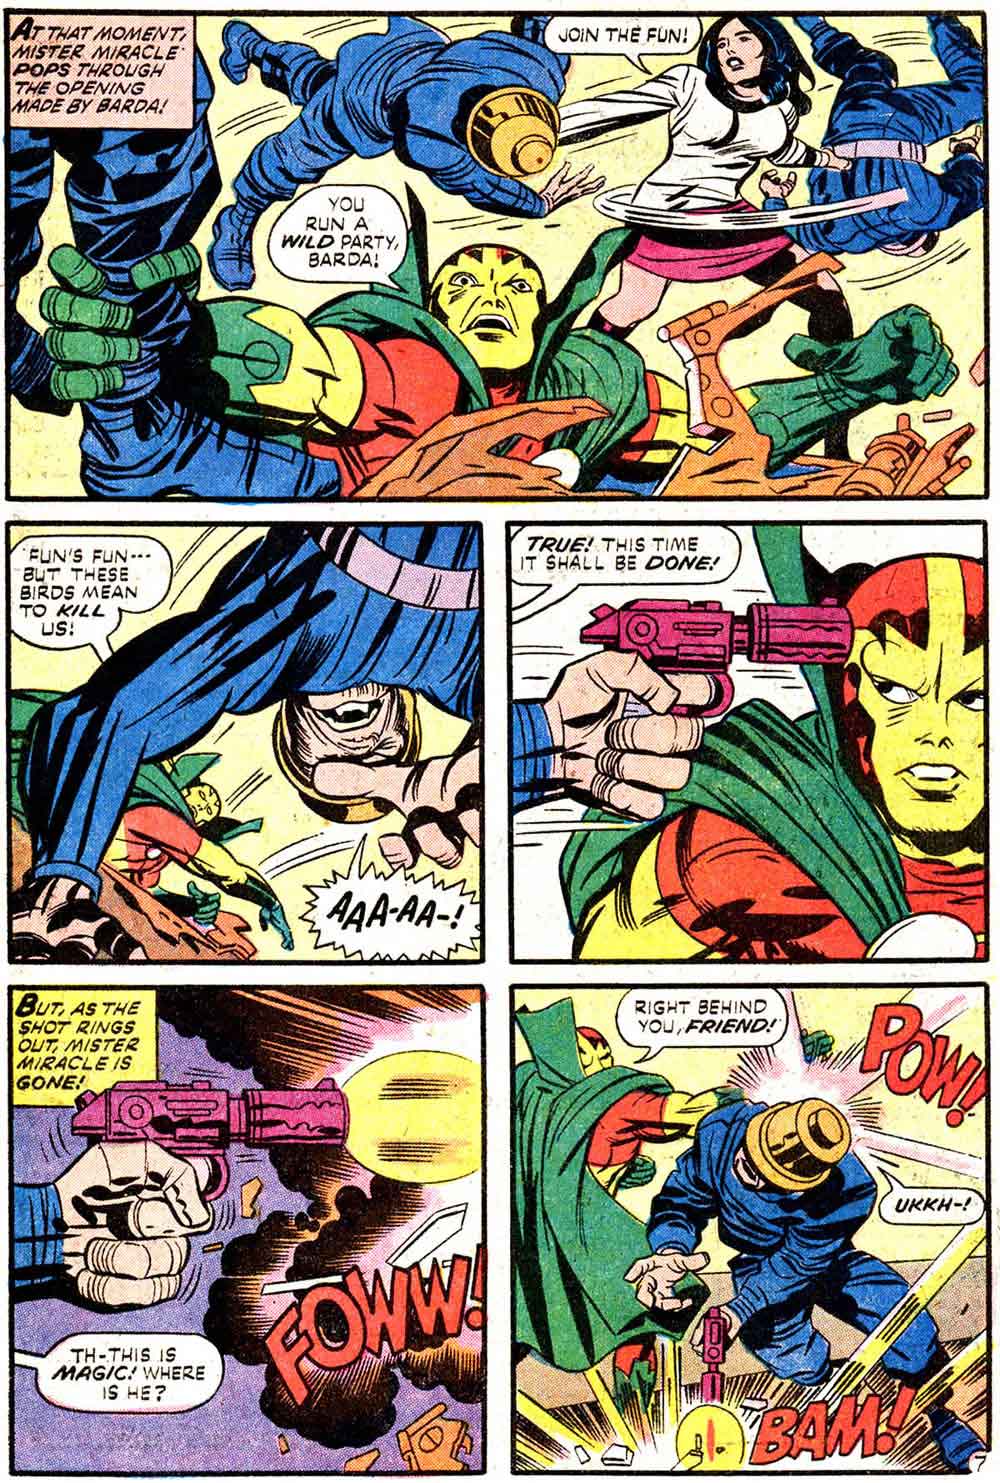 Mister Miracle v1 #13 dc bronze age comic book page art by Jack Kirby